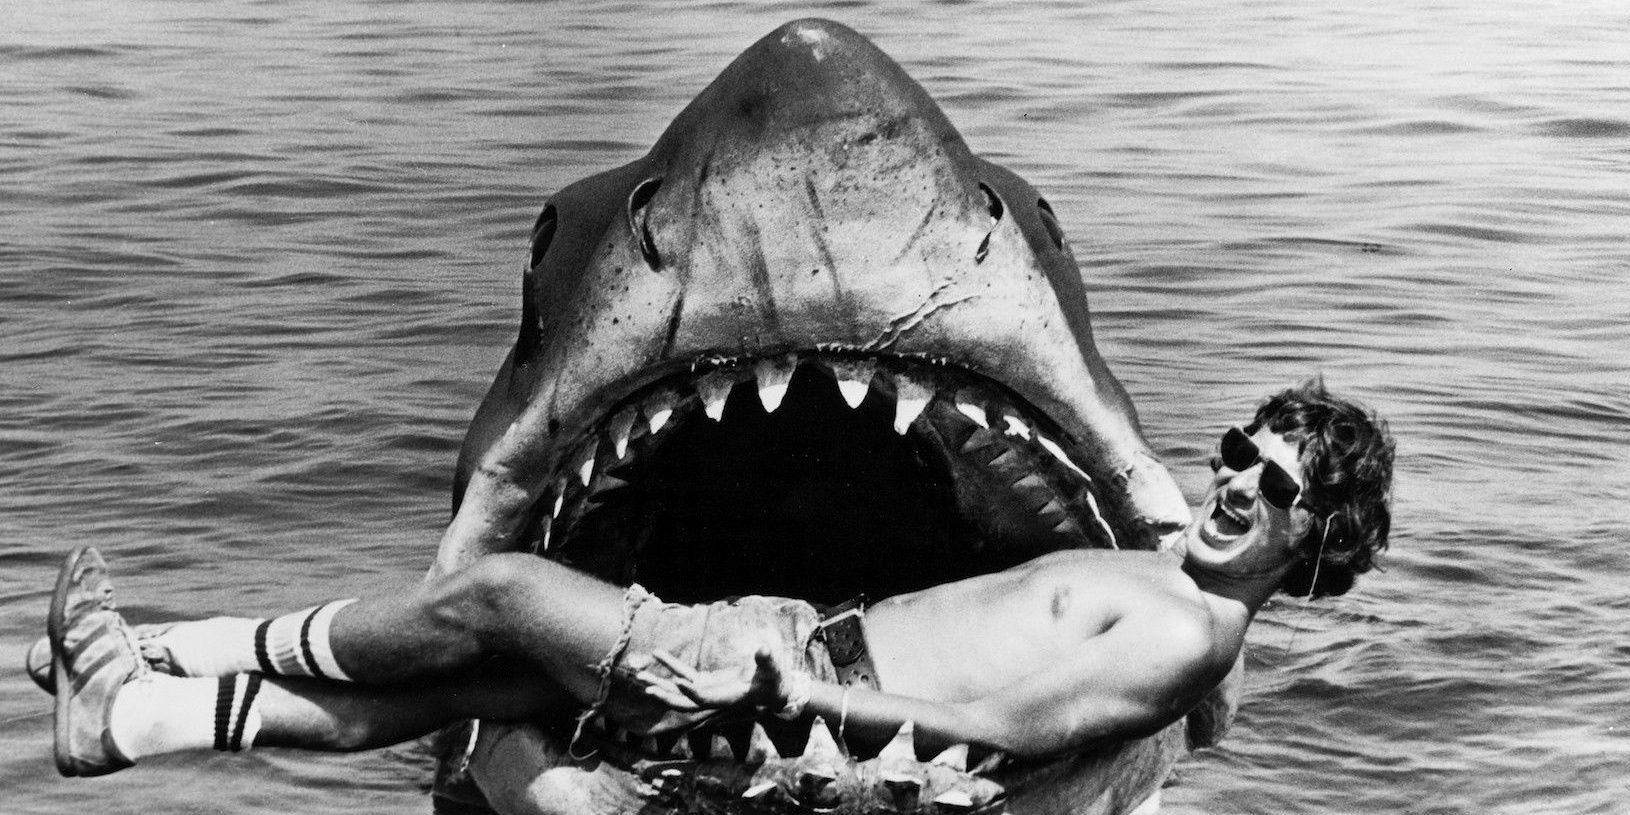 Spielberg in Jaws' mouth